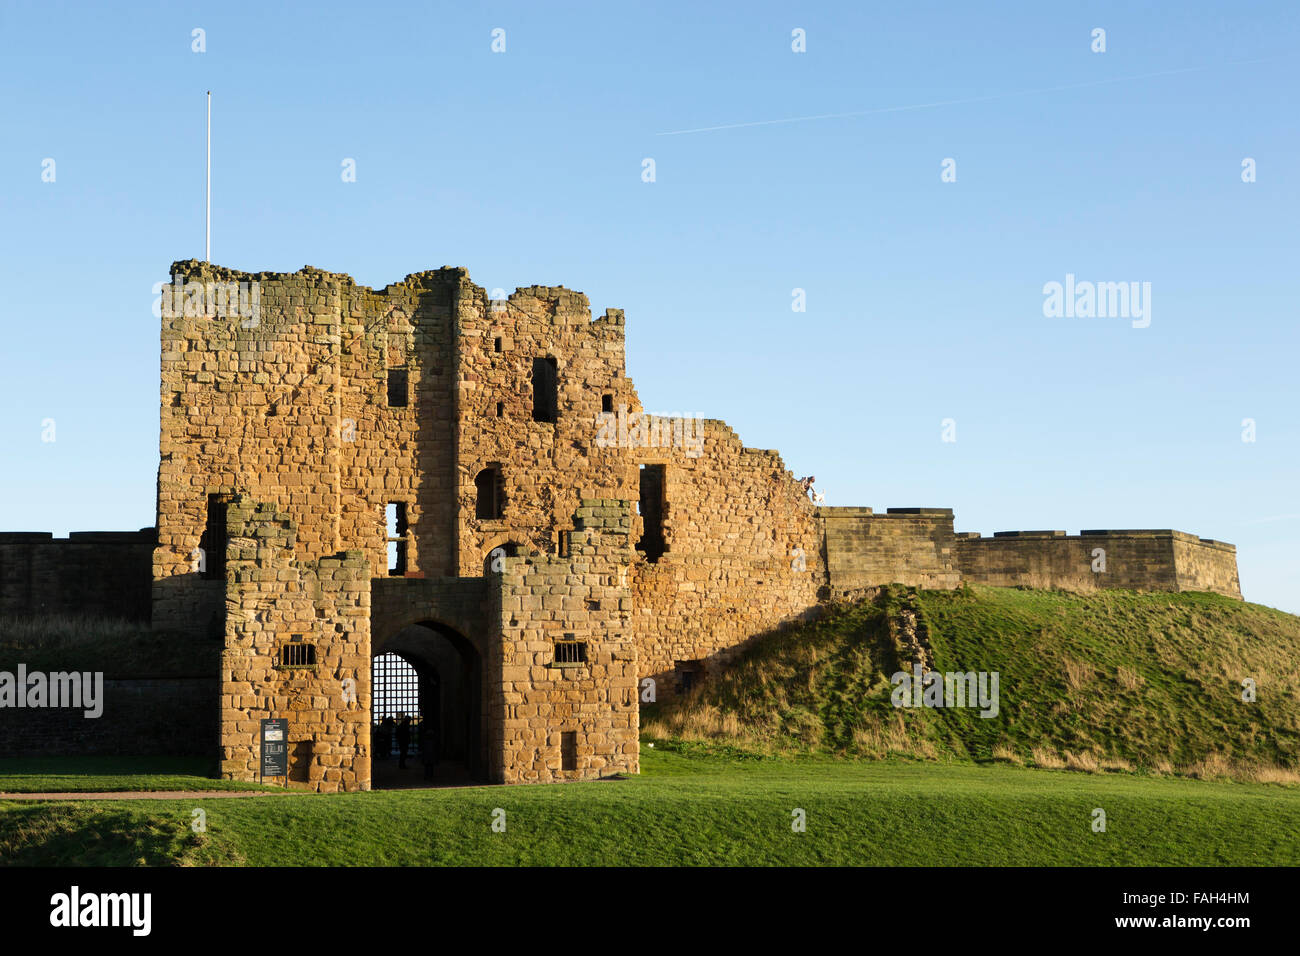 The gatehouse of Tynemouth Priory and Castle in Tynemouth, England. Stock Photo